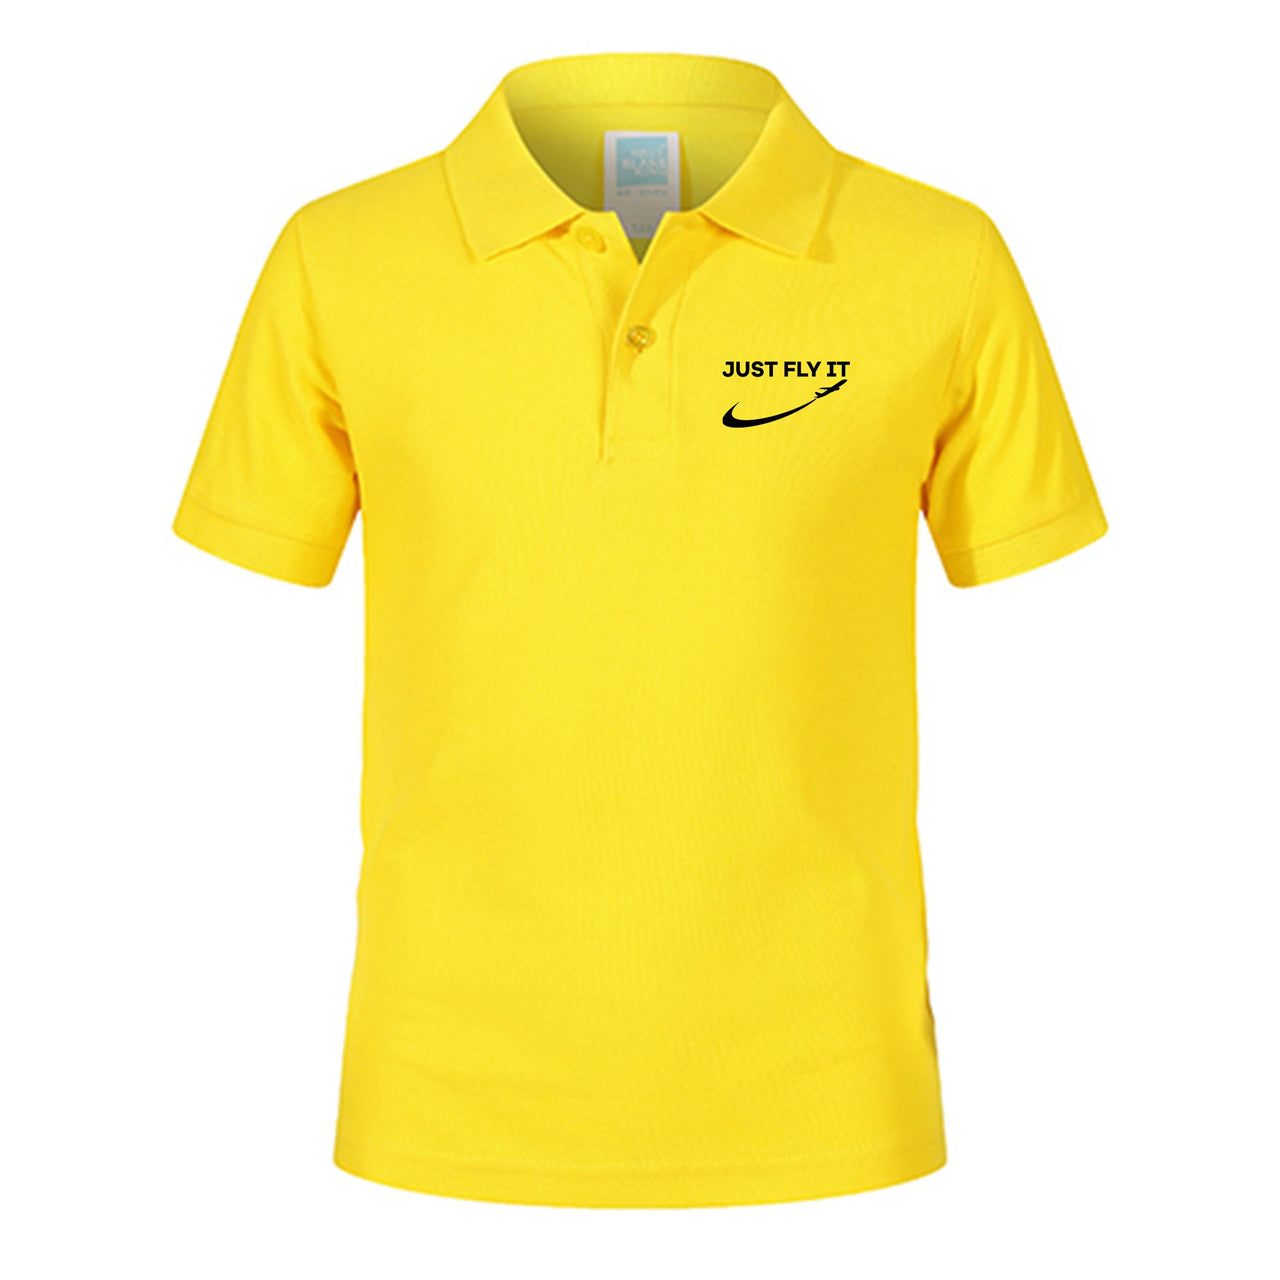 Just Fly It 2 Designed Children Polo T-Shirts